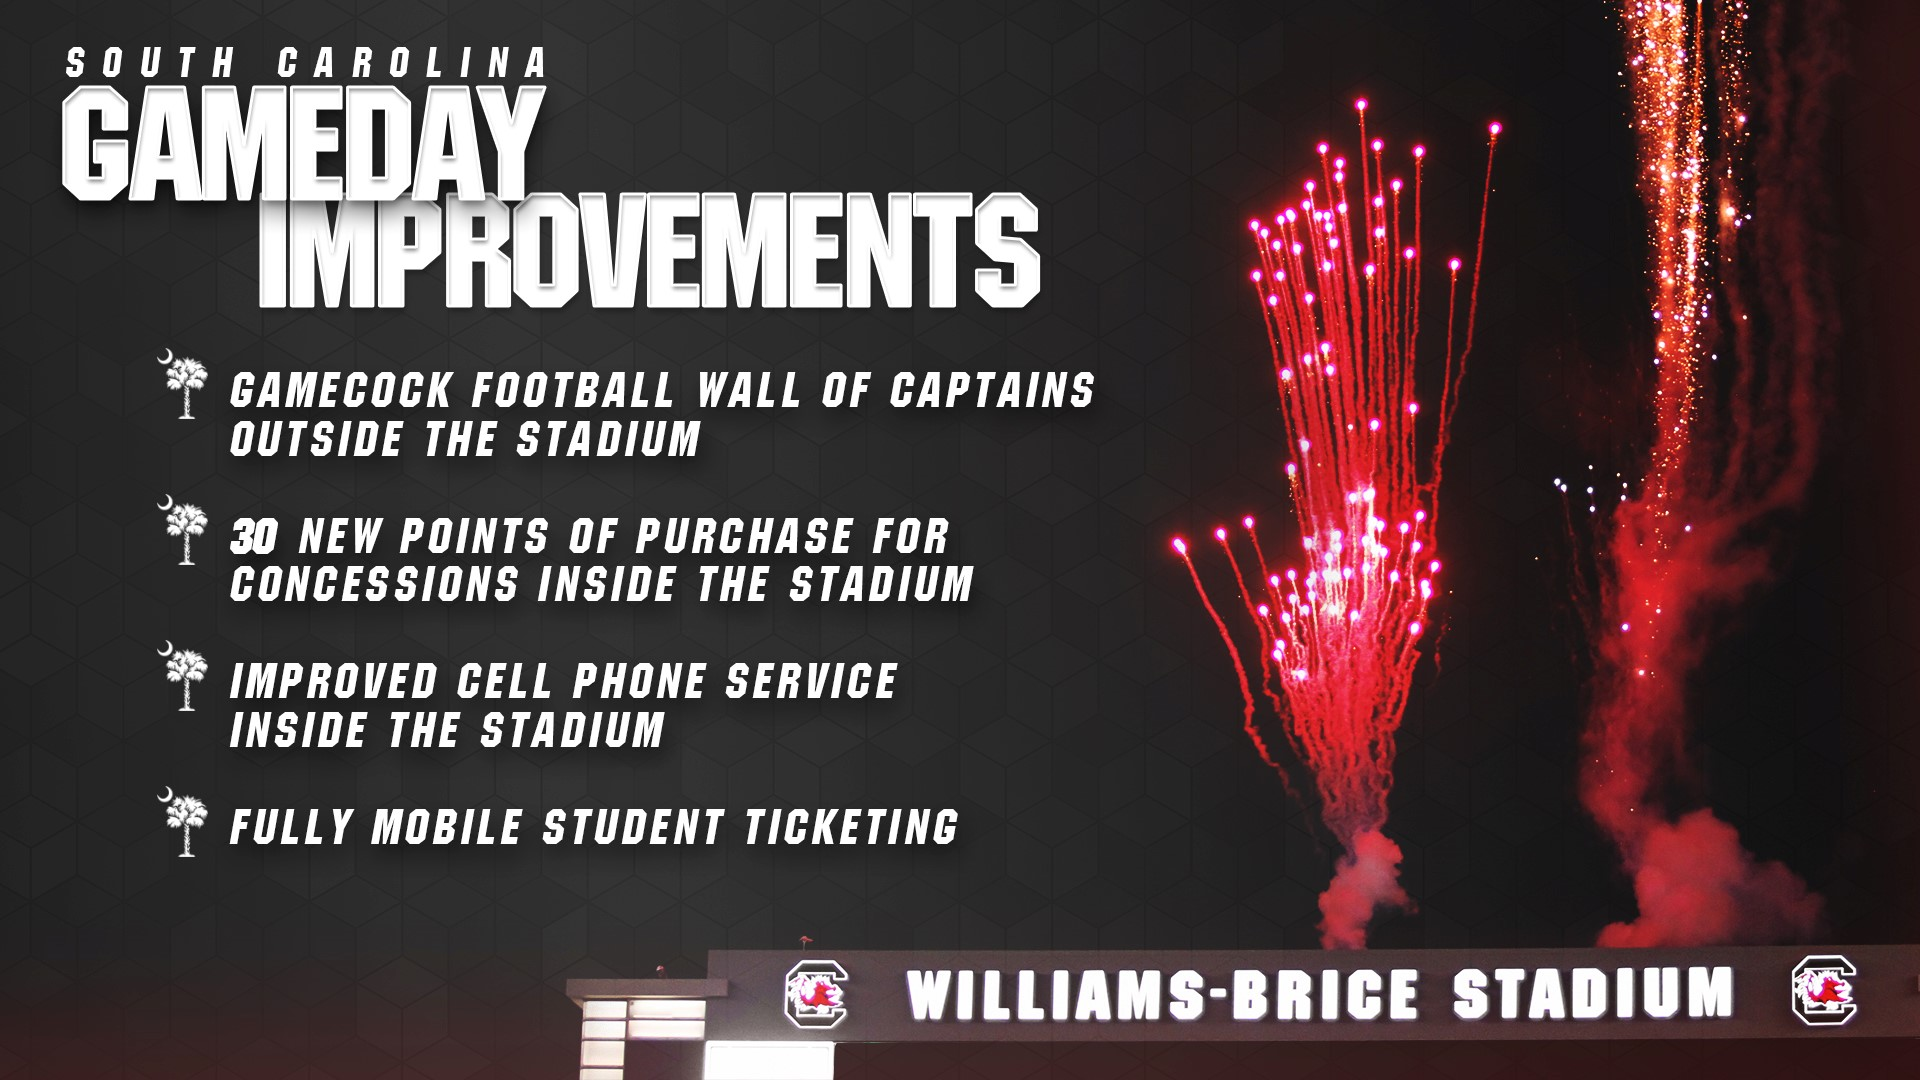 Check Out What's New at Williams-Brice Stadium